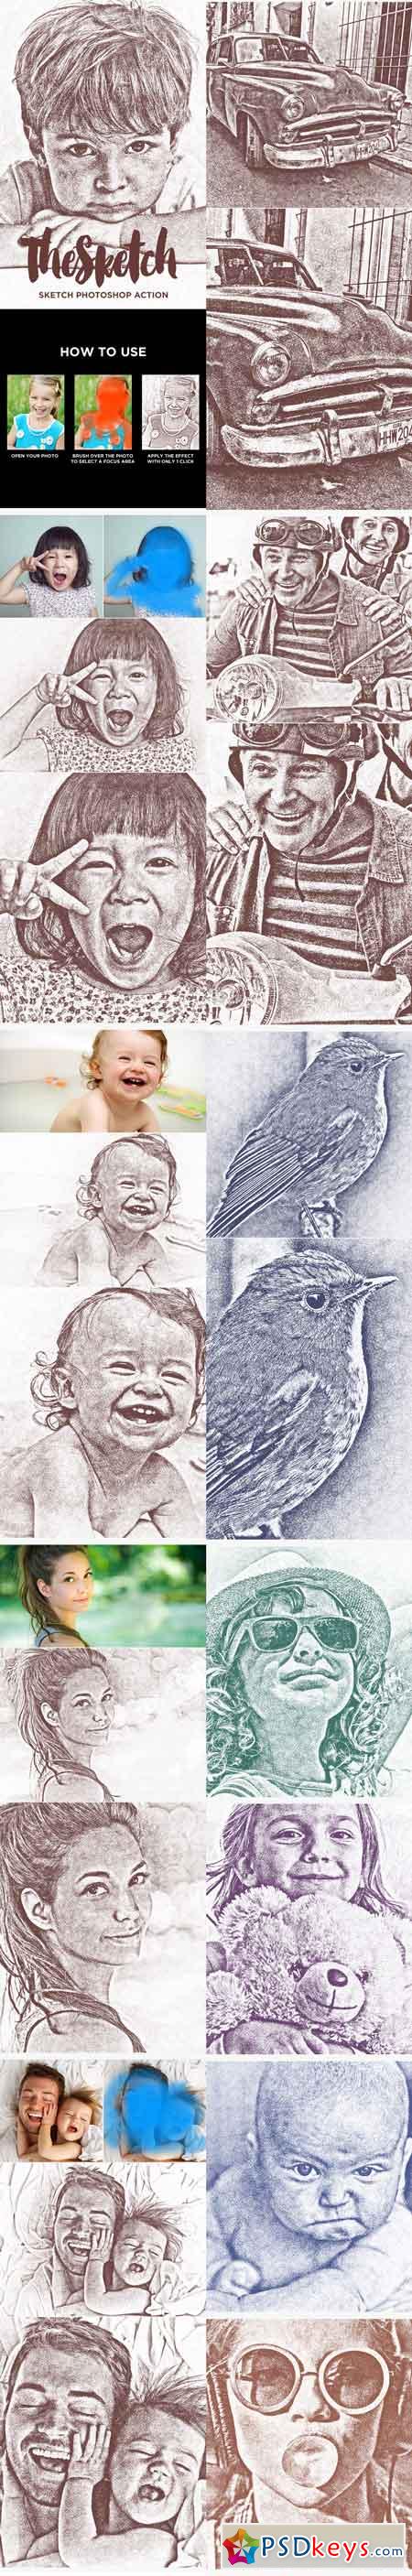 TheSketch - Sketch Photoshop Action 16089152